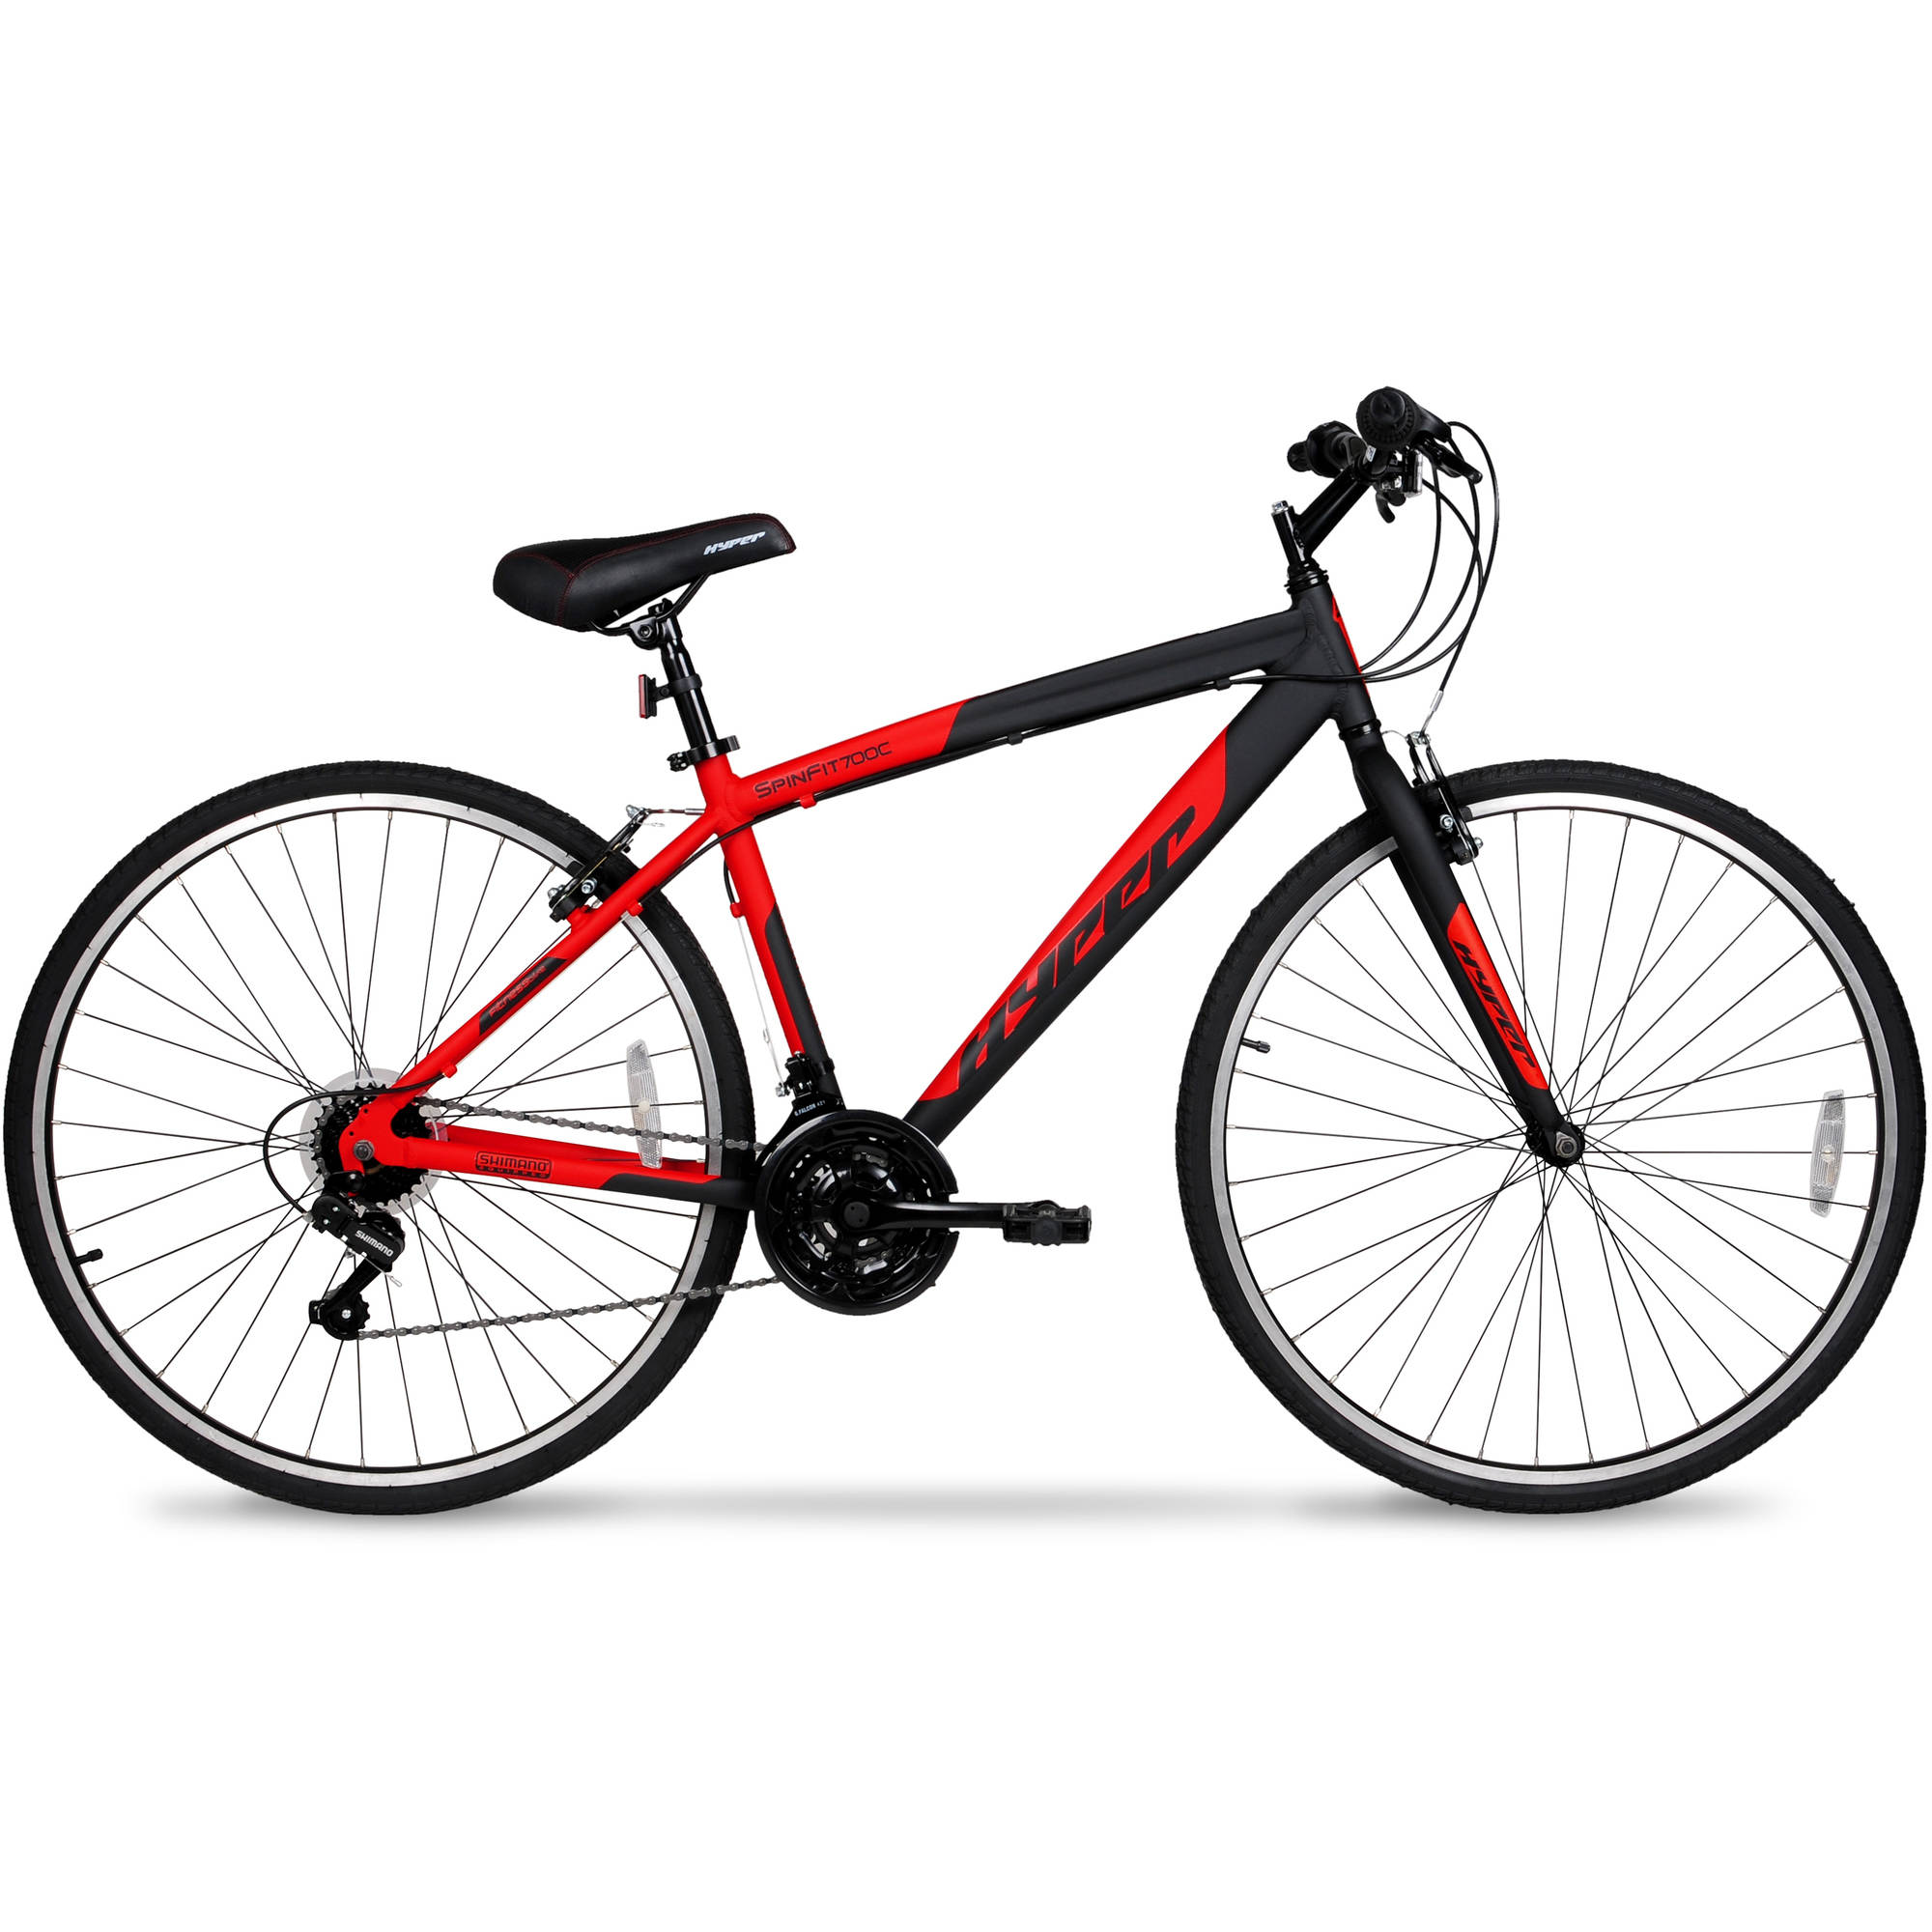 Hyper Bicycle 700c Men's Spin Fit Hybrid Bike, Black and Red - image 2 of 7